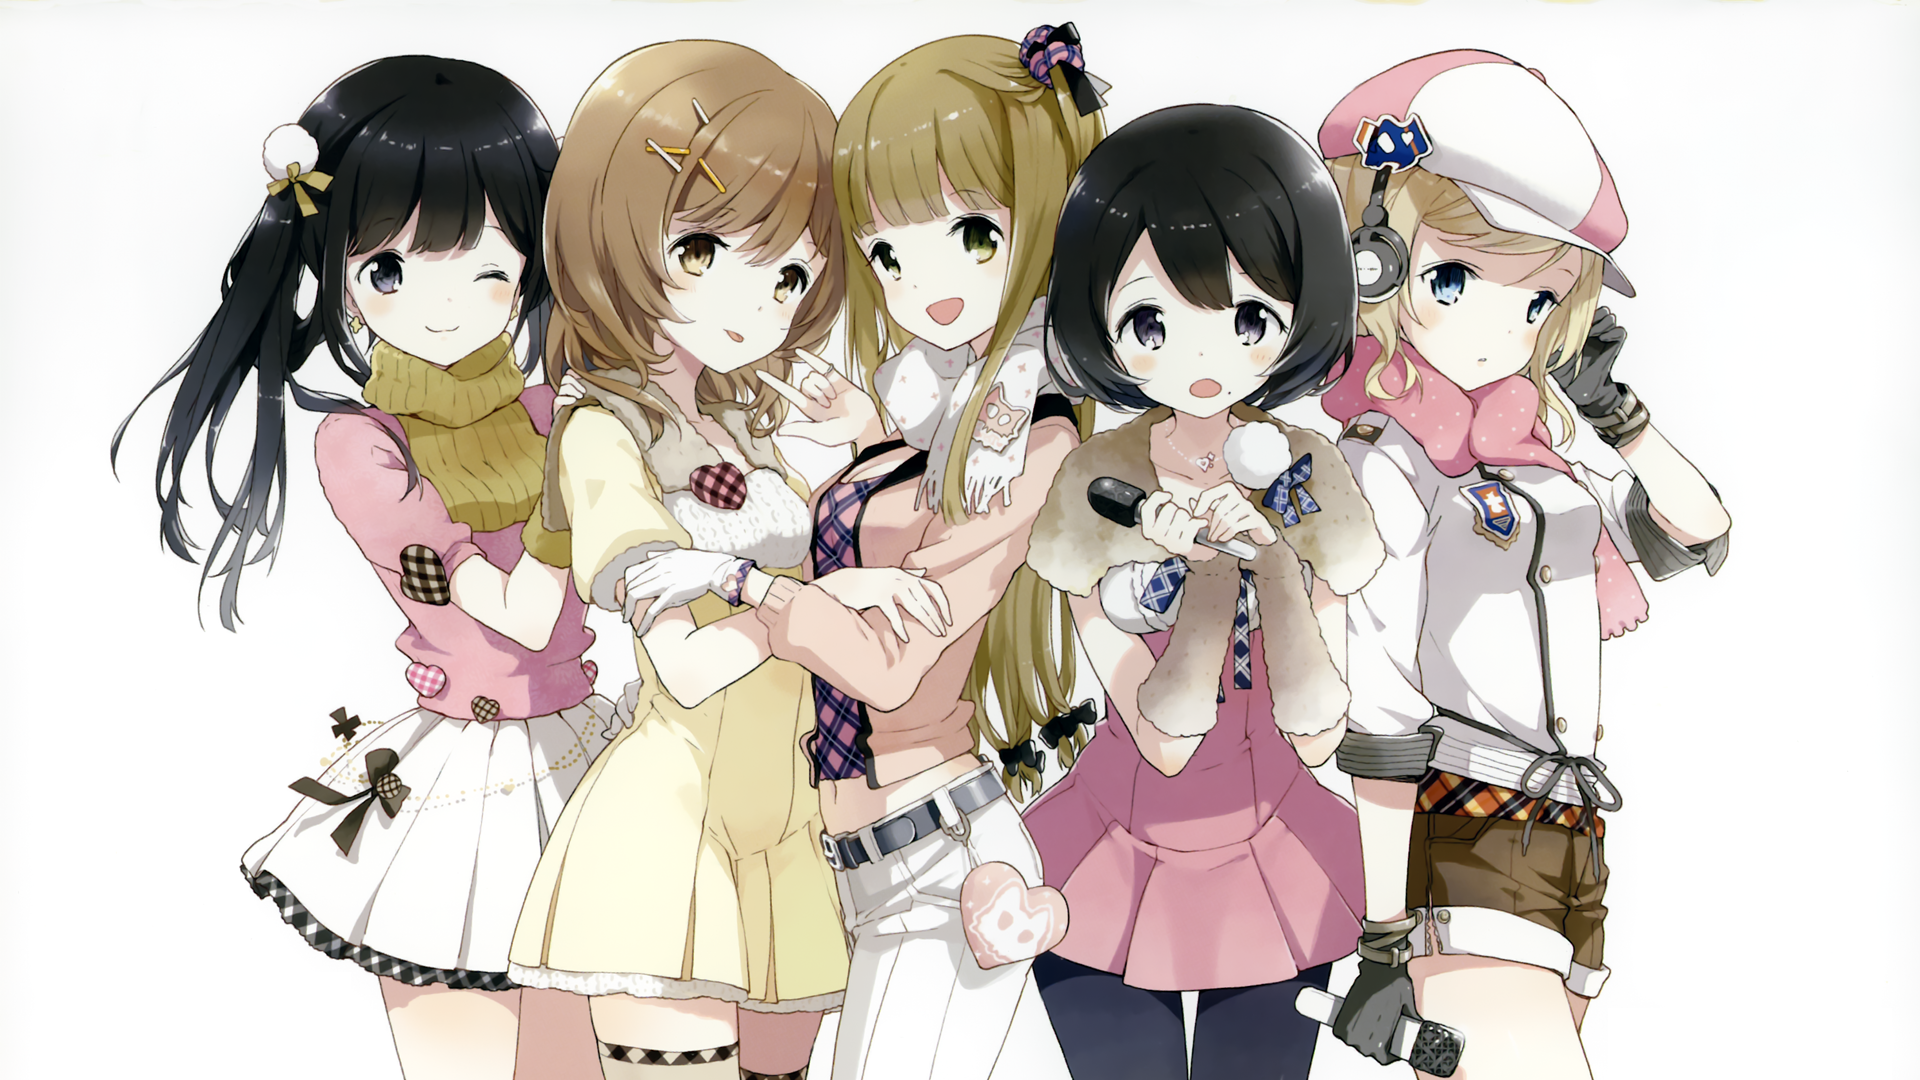 Anime 1920x1080 anime original characters anime girls group of women simple background white background